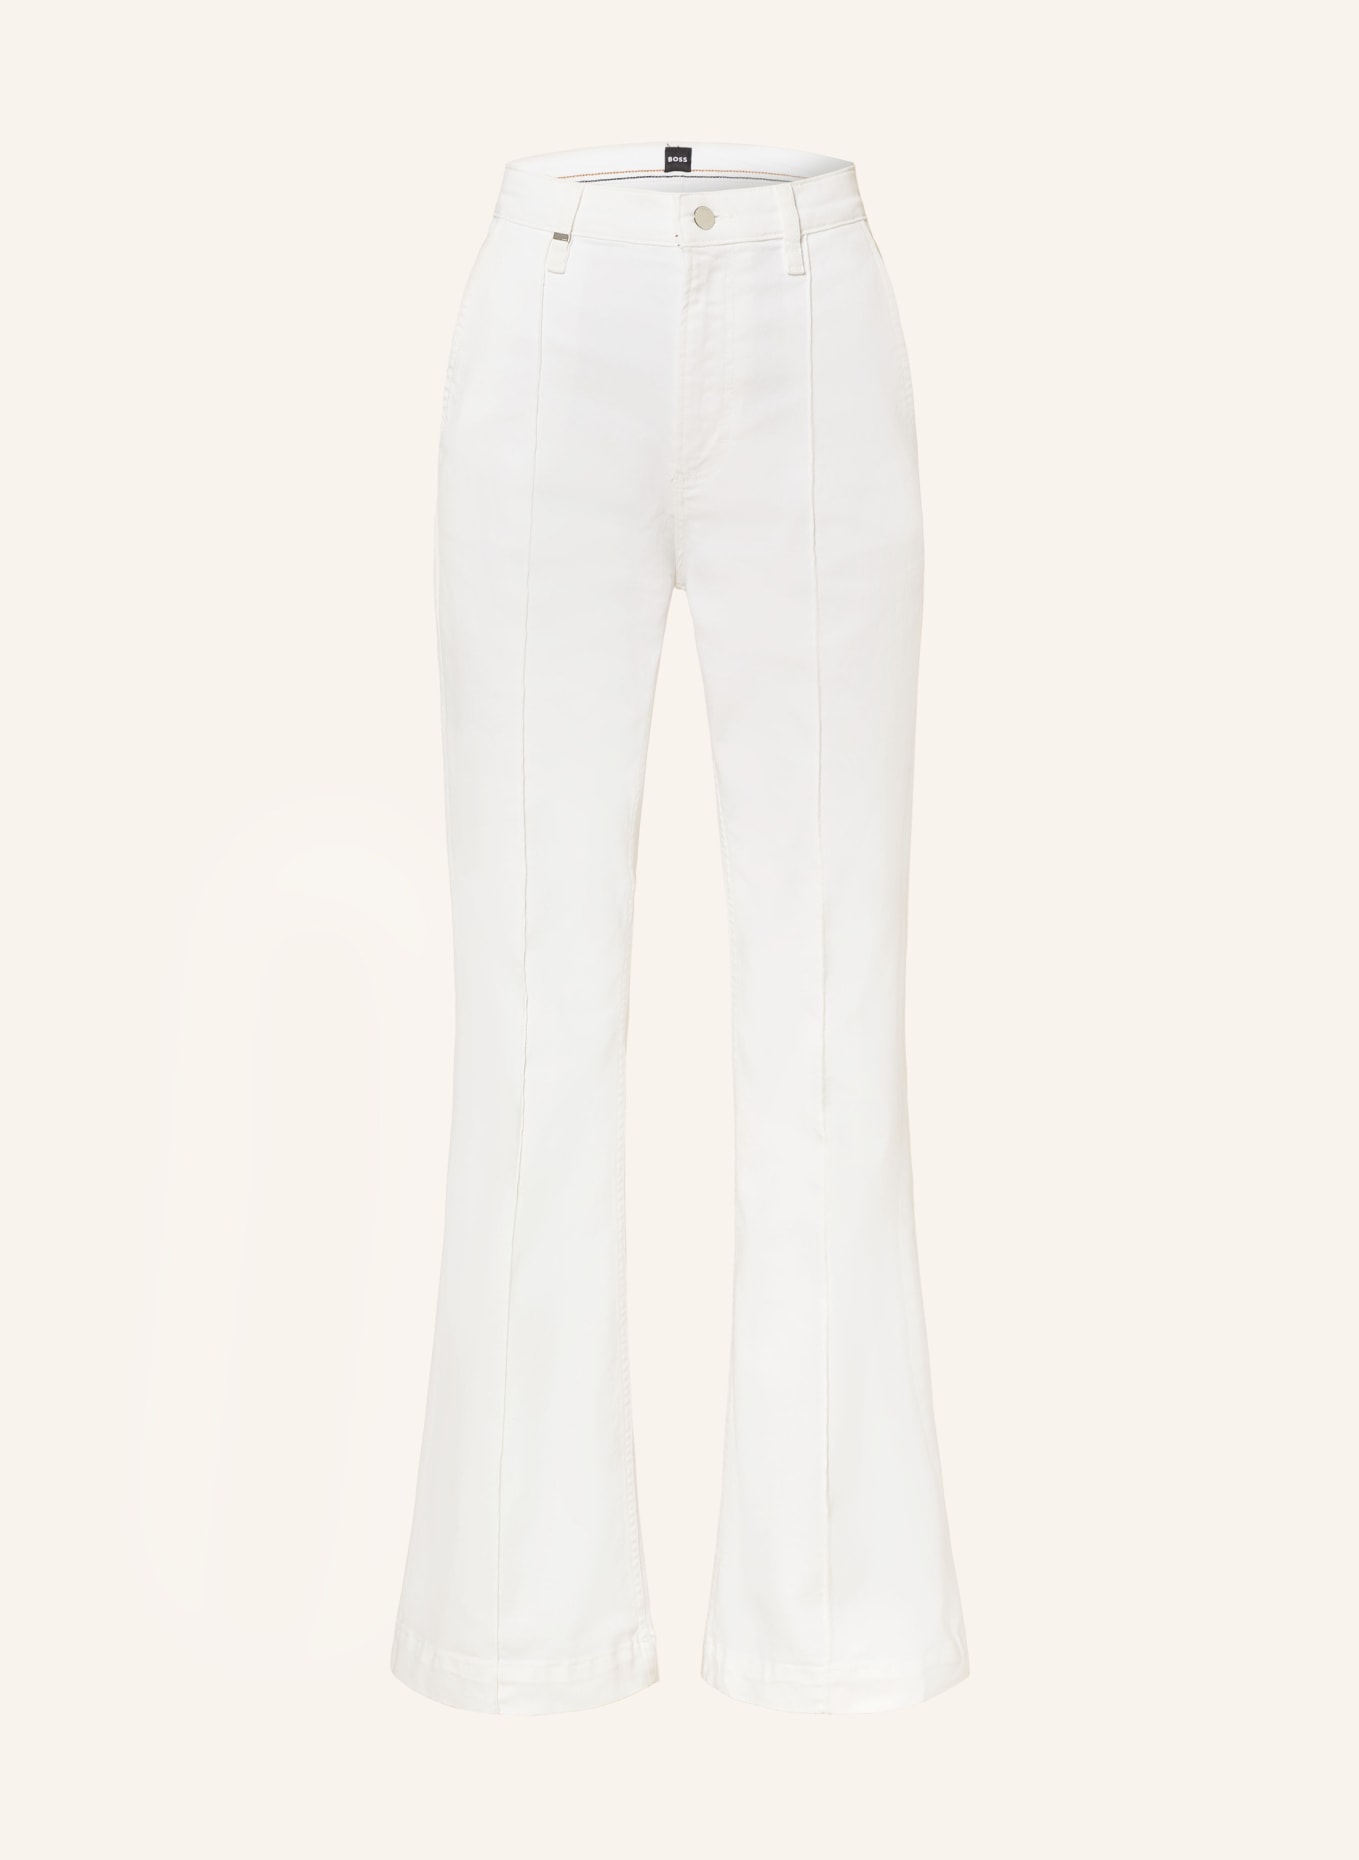 BOSS Flared Jeans FLARE HR 2.0, Farbe: 106 NATURAL (Bild 1)